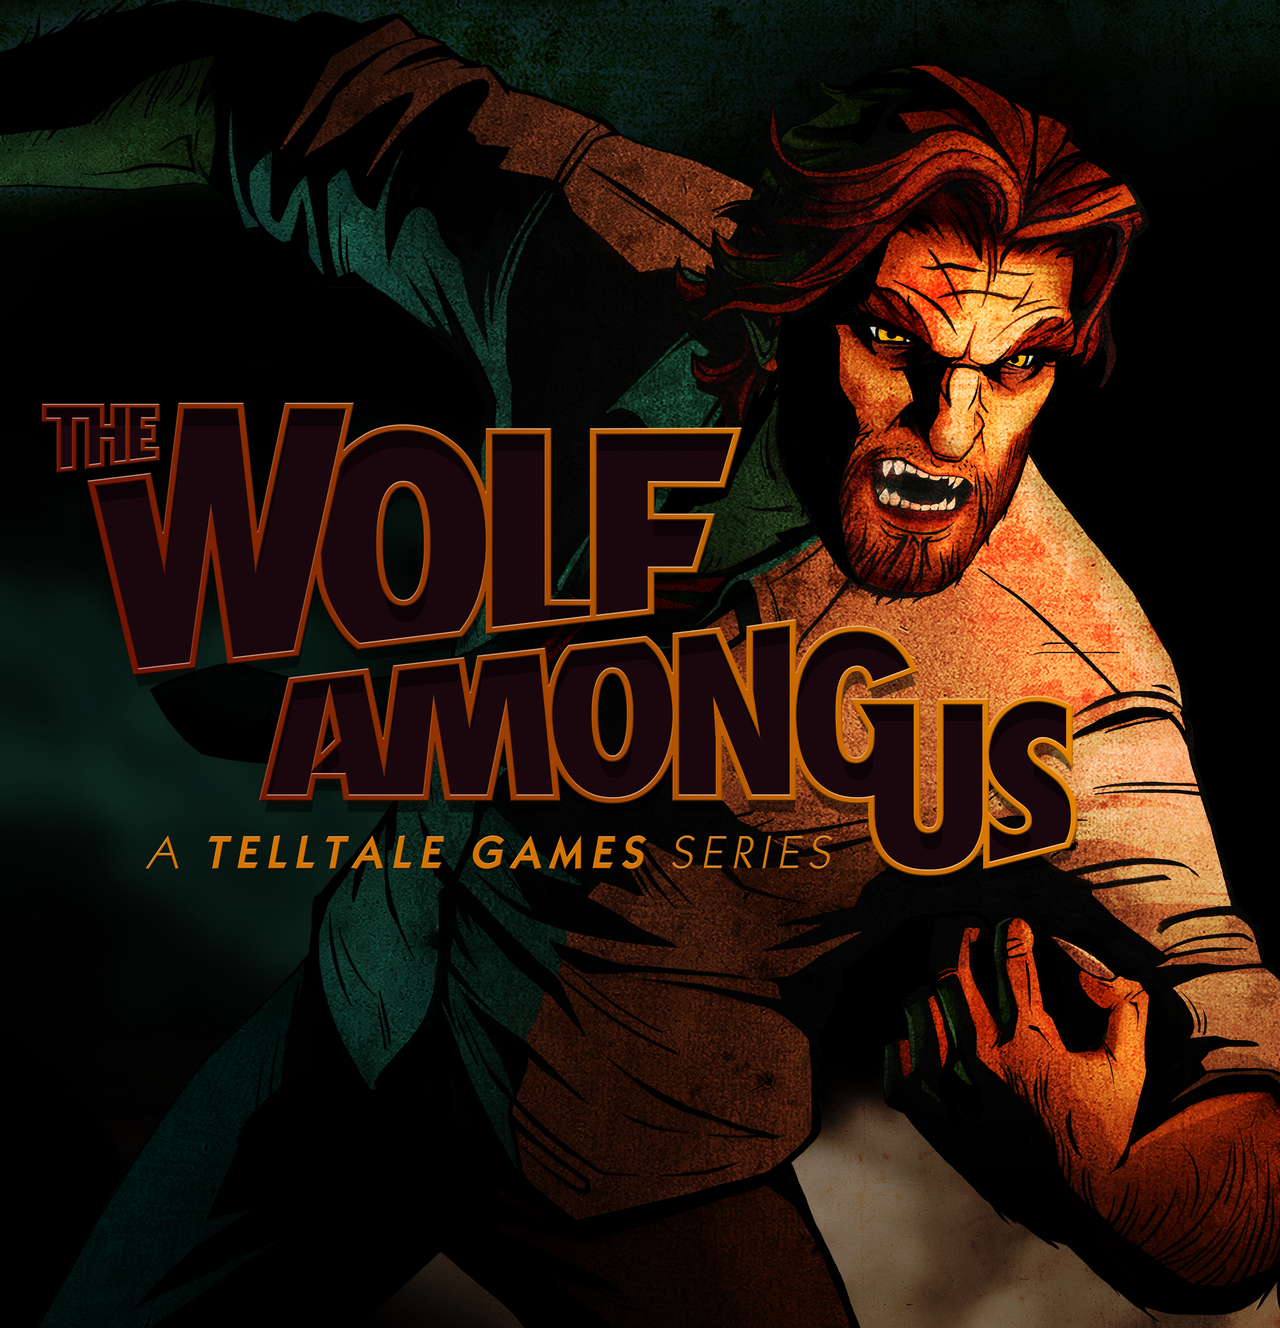 jaquette-the-wolf-among-us-playstation-3-ps3-cover-avant-g-13813397682.jpg